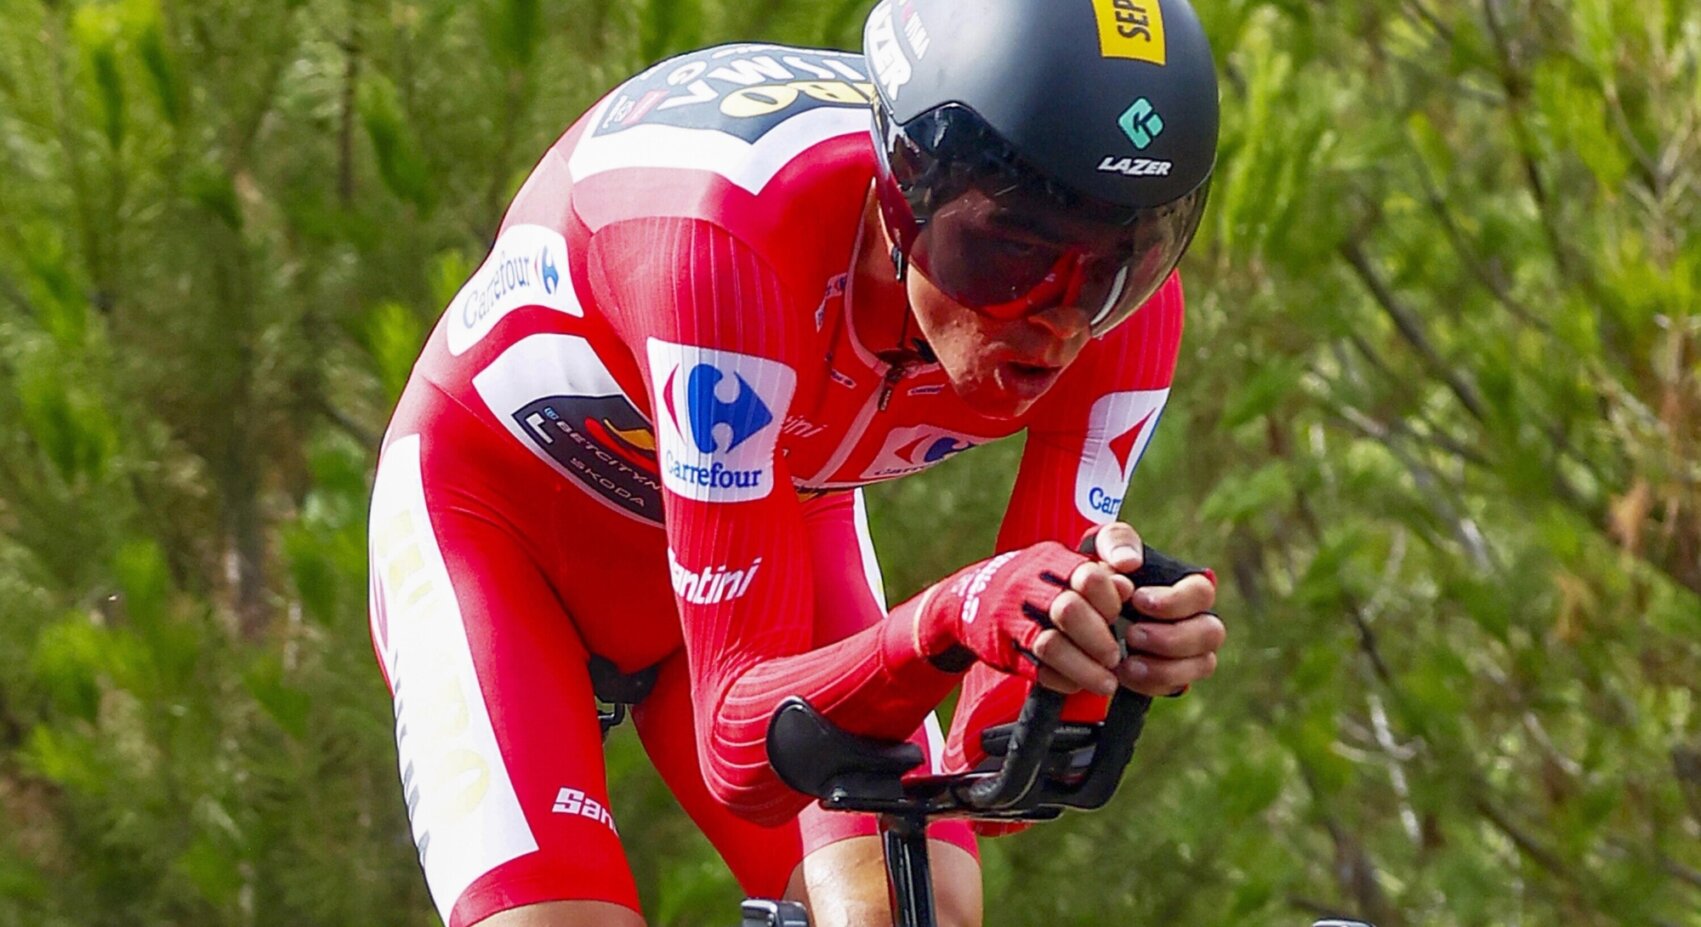 Kuss remains leader at Vuelta a España after good time trial	